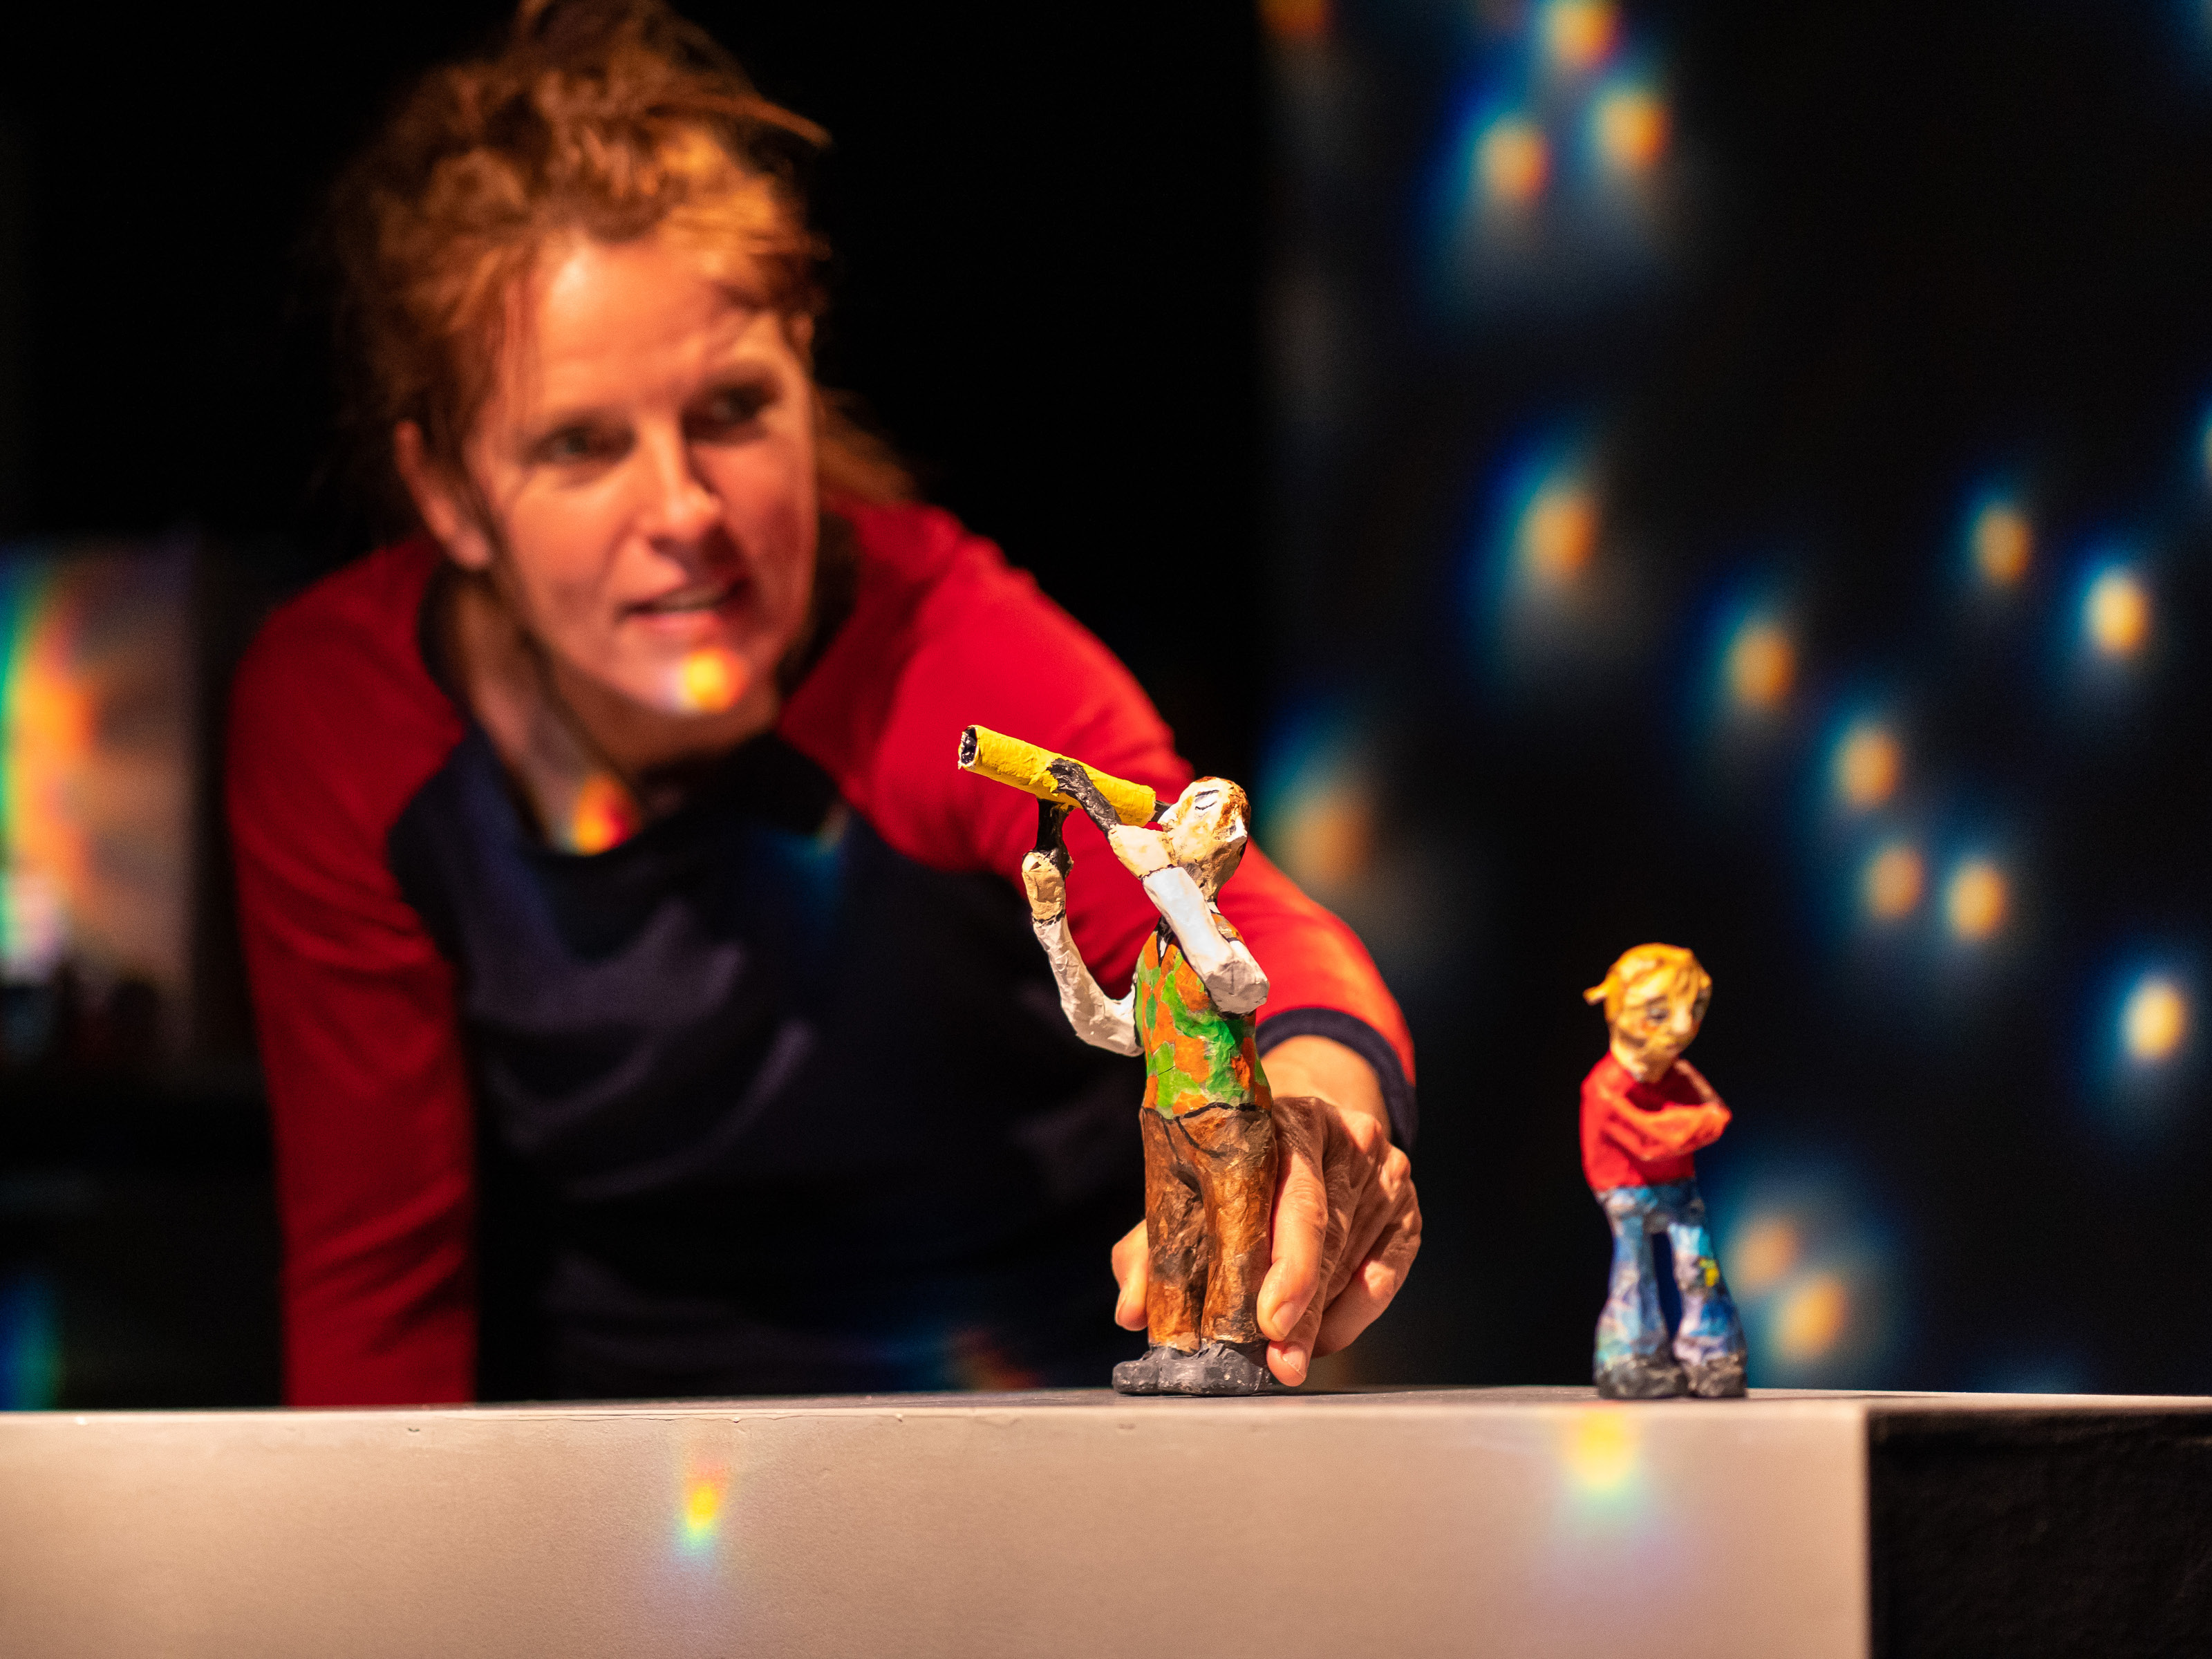 Puppeteer Annegret Geist holds the figure of a man with a telescope in his hand. A little girl with red hair stands facing away from him with her arms crossed. In the background, bright points of light shine on the dark wall.